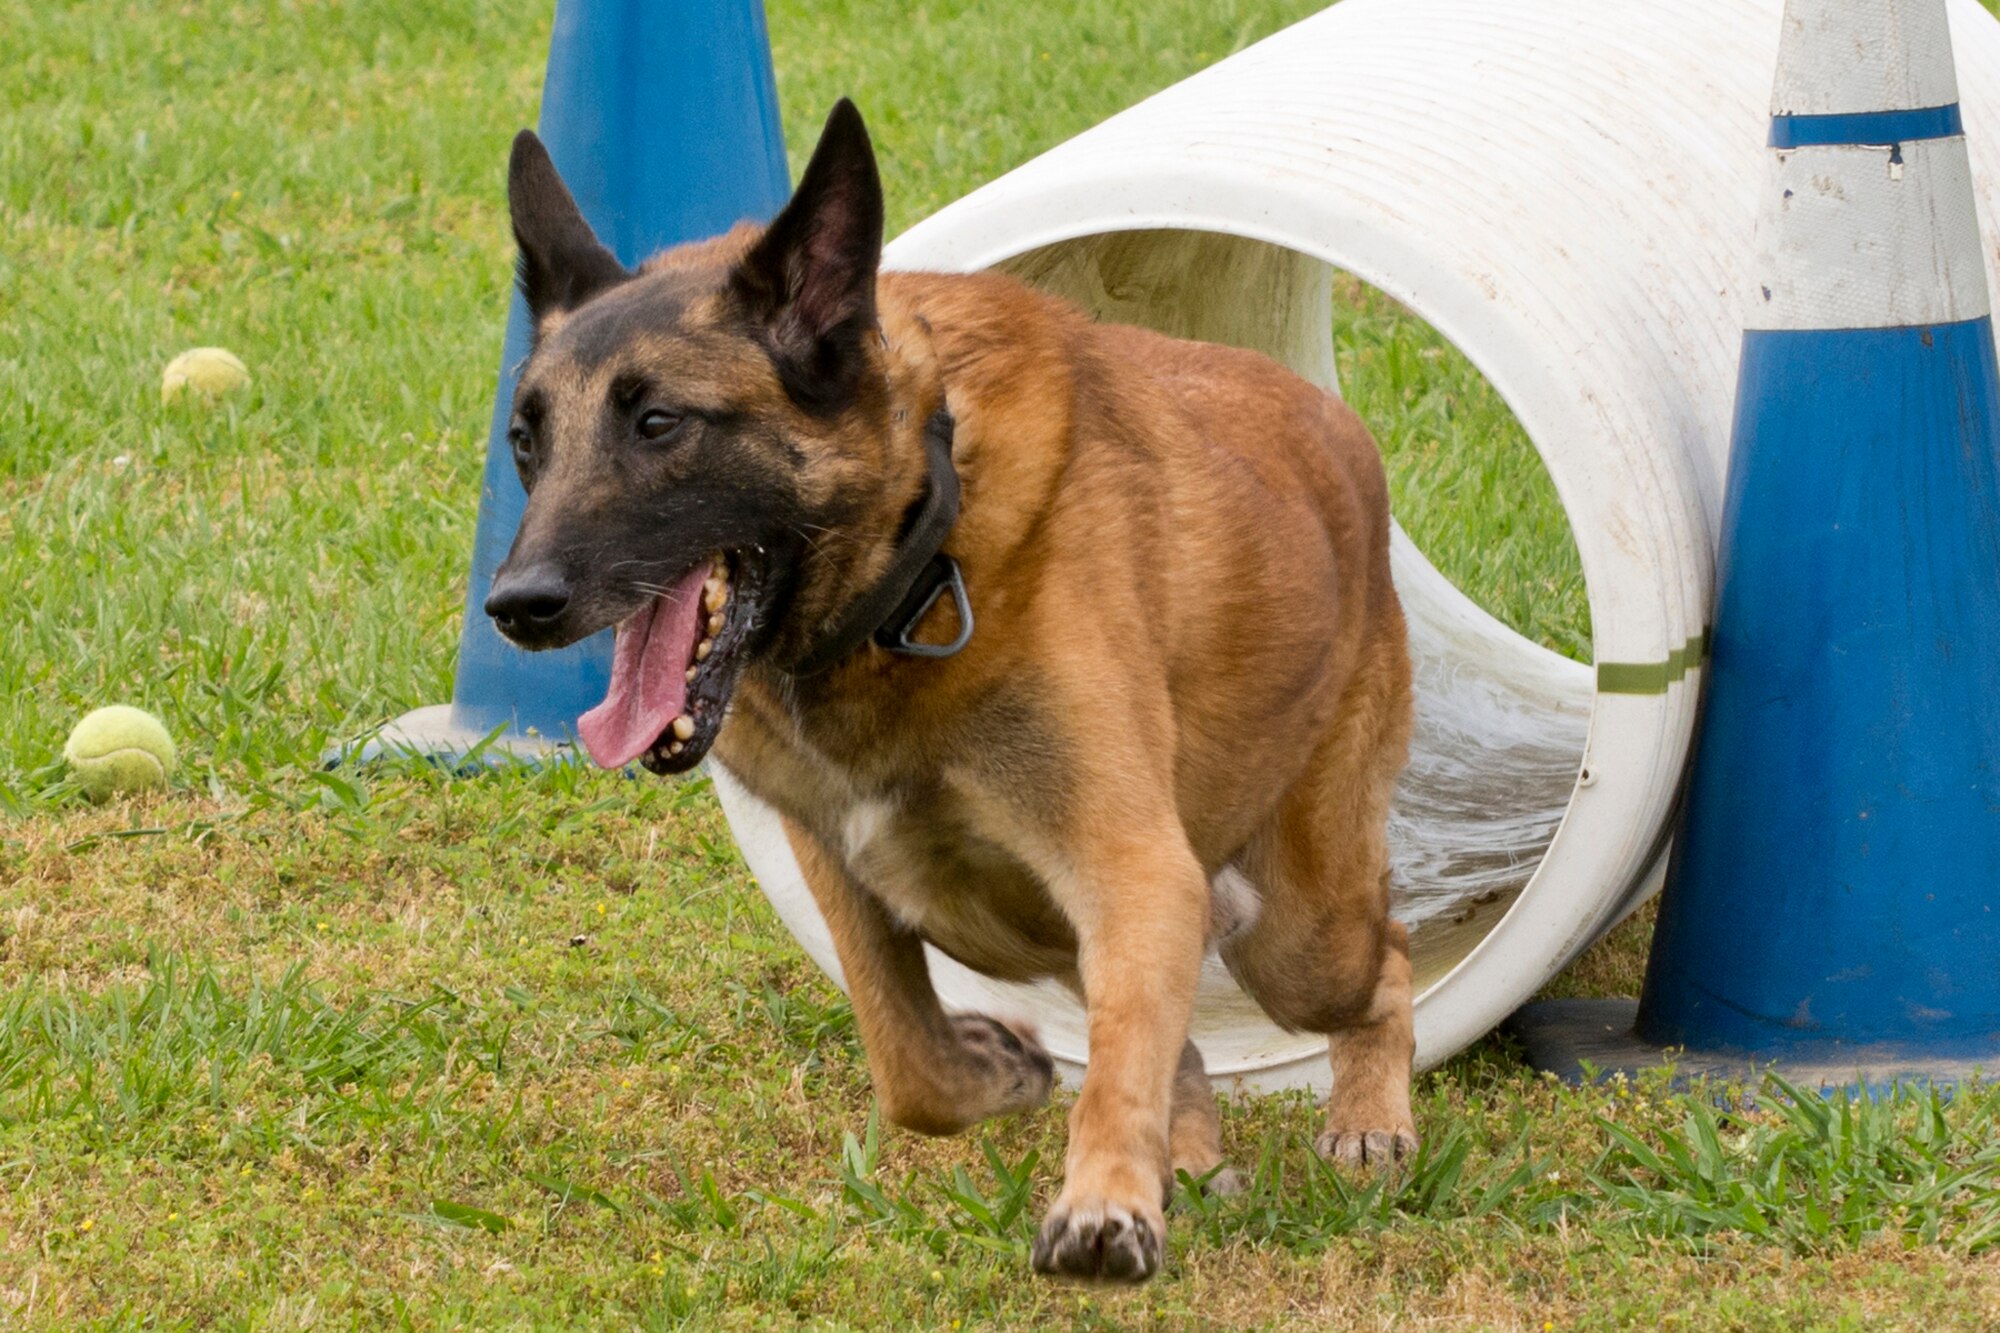 Britt, a U.S. Air Force military working dog assigned to the 19th Security Forces Squadron, exits a plastic tube during the “Military Working Dog (MWD) Competition" at Little Rock Air Force Base, Ark., May 17, 2017. This portion of the event simulates the dog’s ability to go into a culvert after a suspect. Britt’s handler is U.S. Air Force Staff Sgt. Caleb McDaniel, 19th SFS. (U.S. Air Force photo by Master Sgt. Jeff Walston/Released)